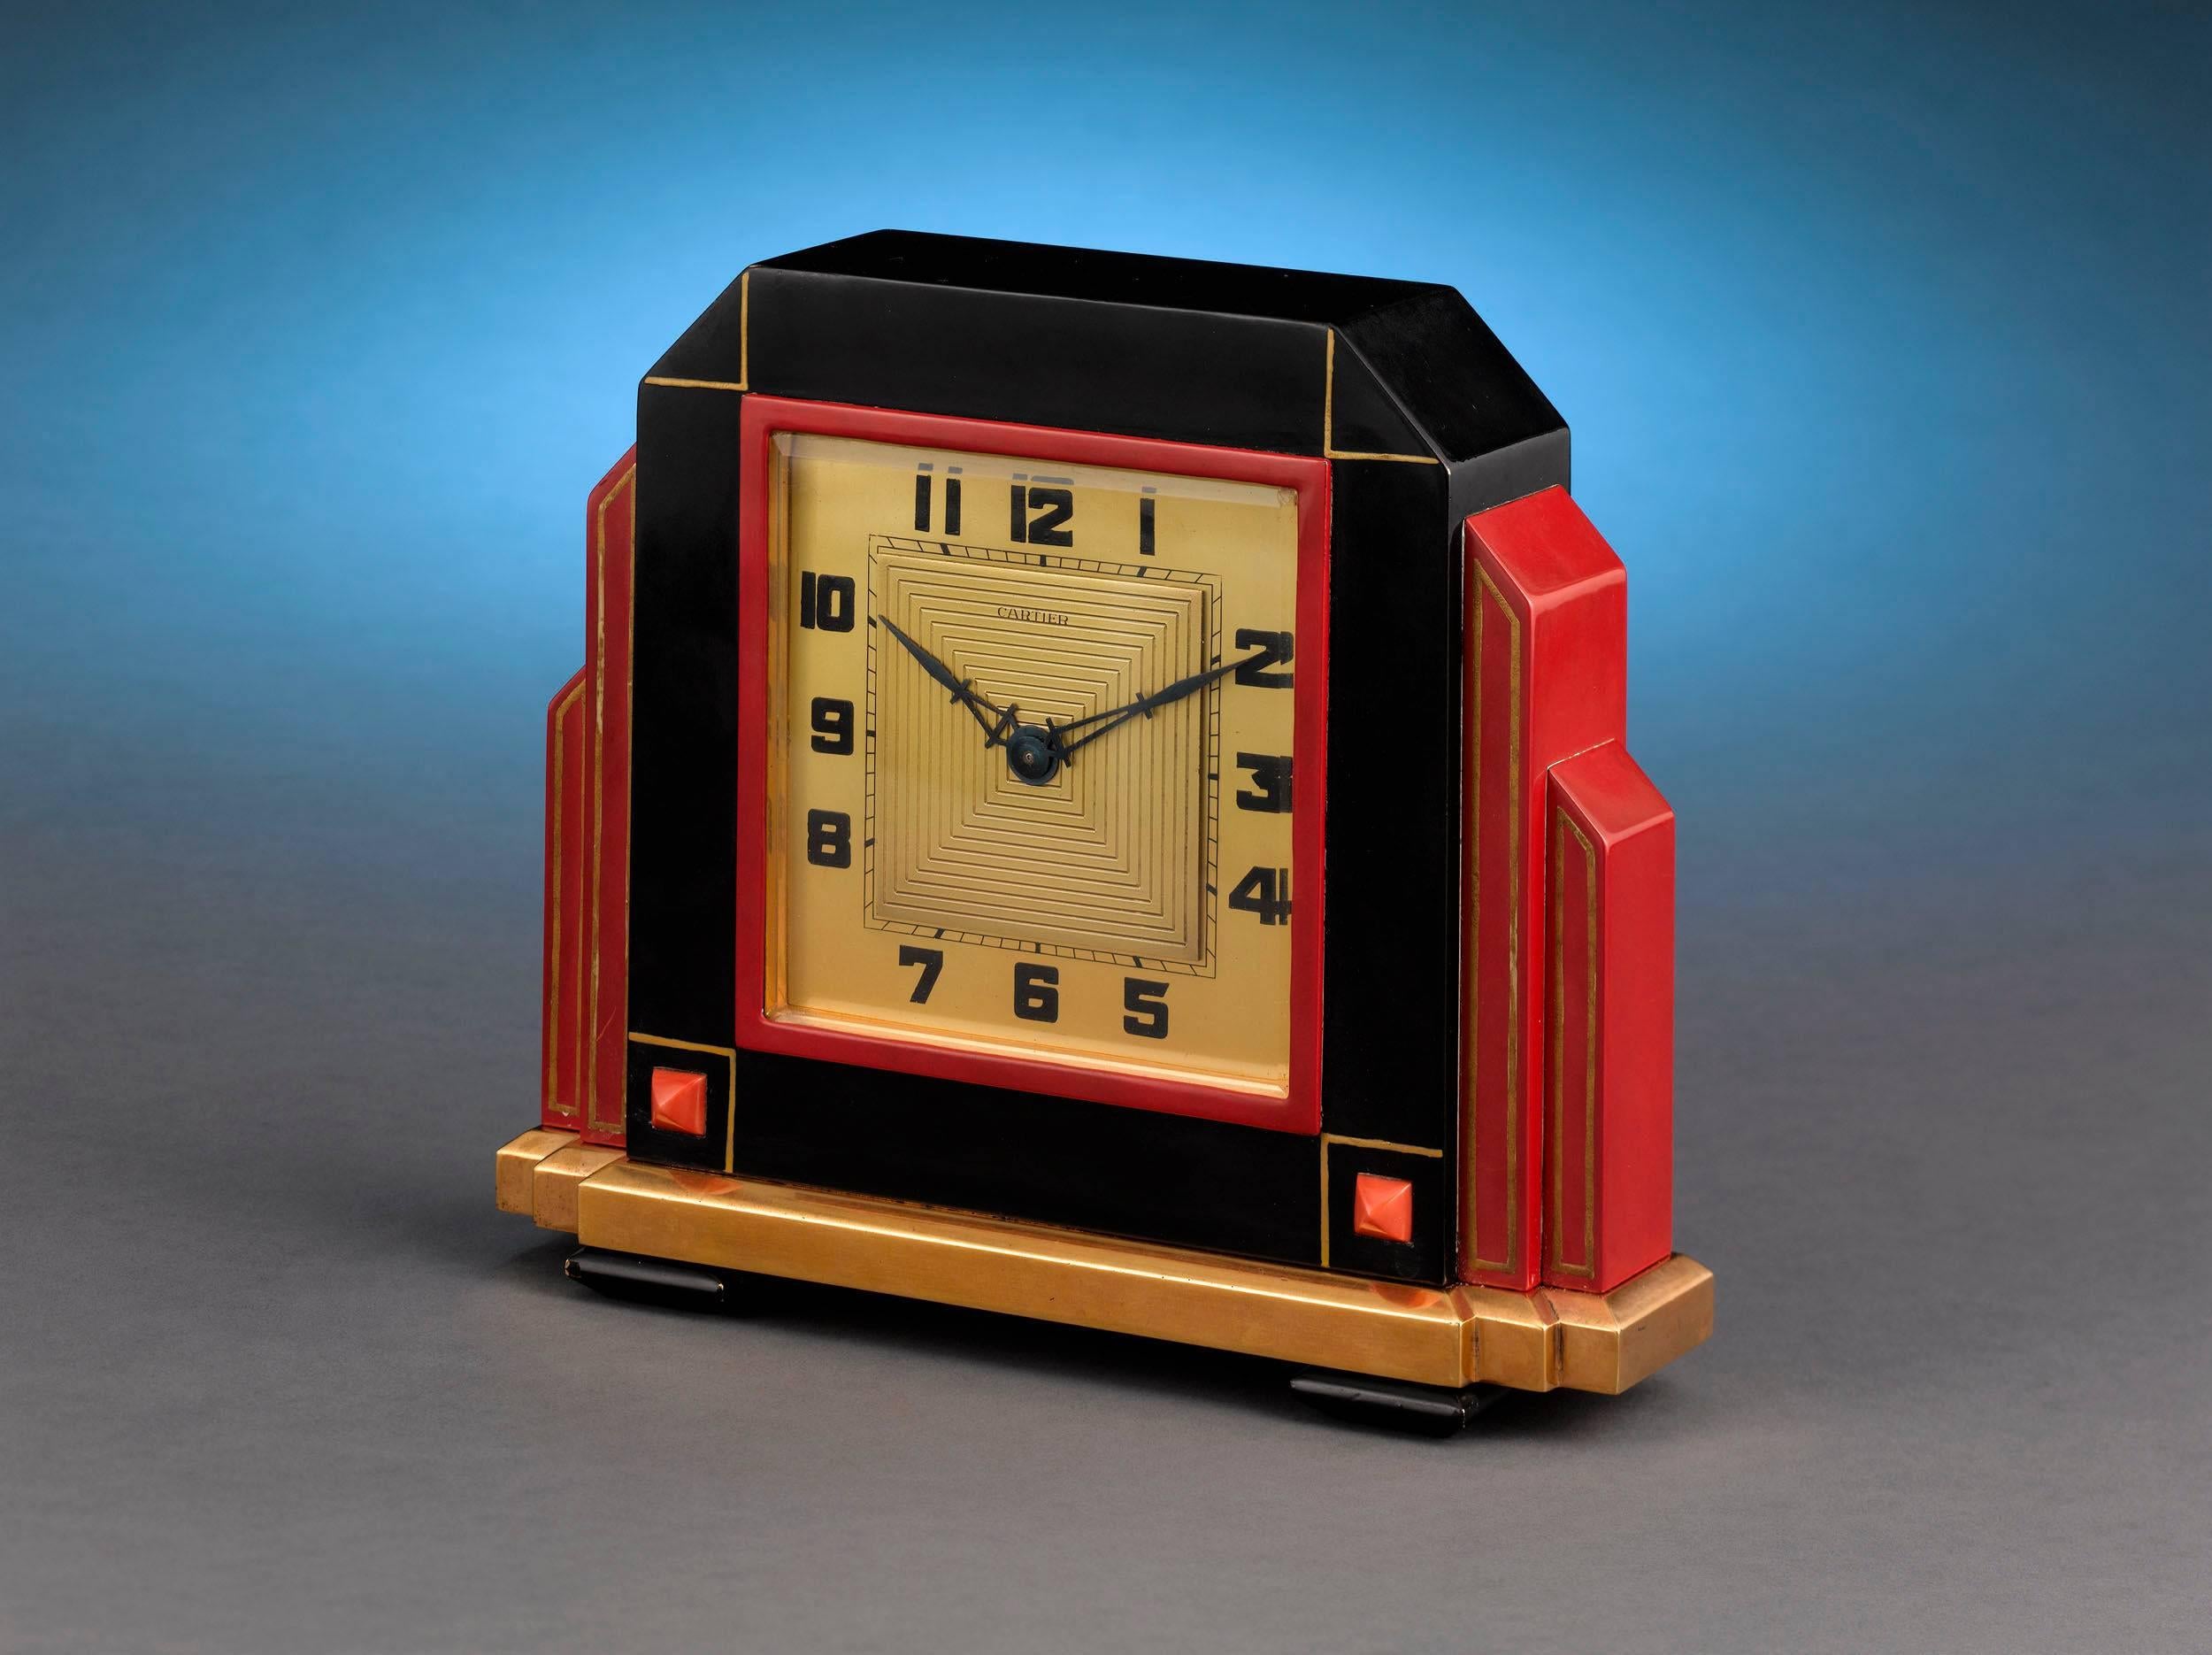 This rare and stylish clock by Cartier is the epitome of Art Deco design. This timepiece is housed in its sleek, architectural case, the black and red enameling reflecting Cartier's incredibly popular Oriental aesthetic, as imagined by legendary